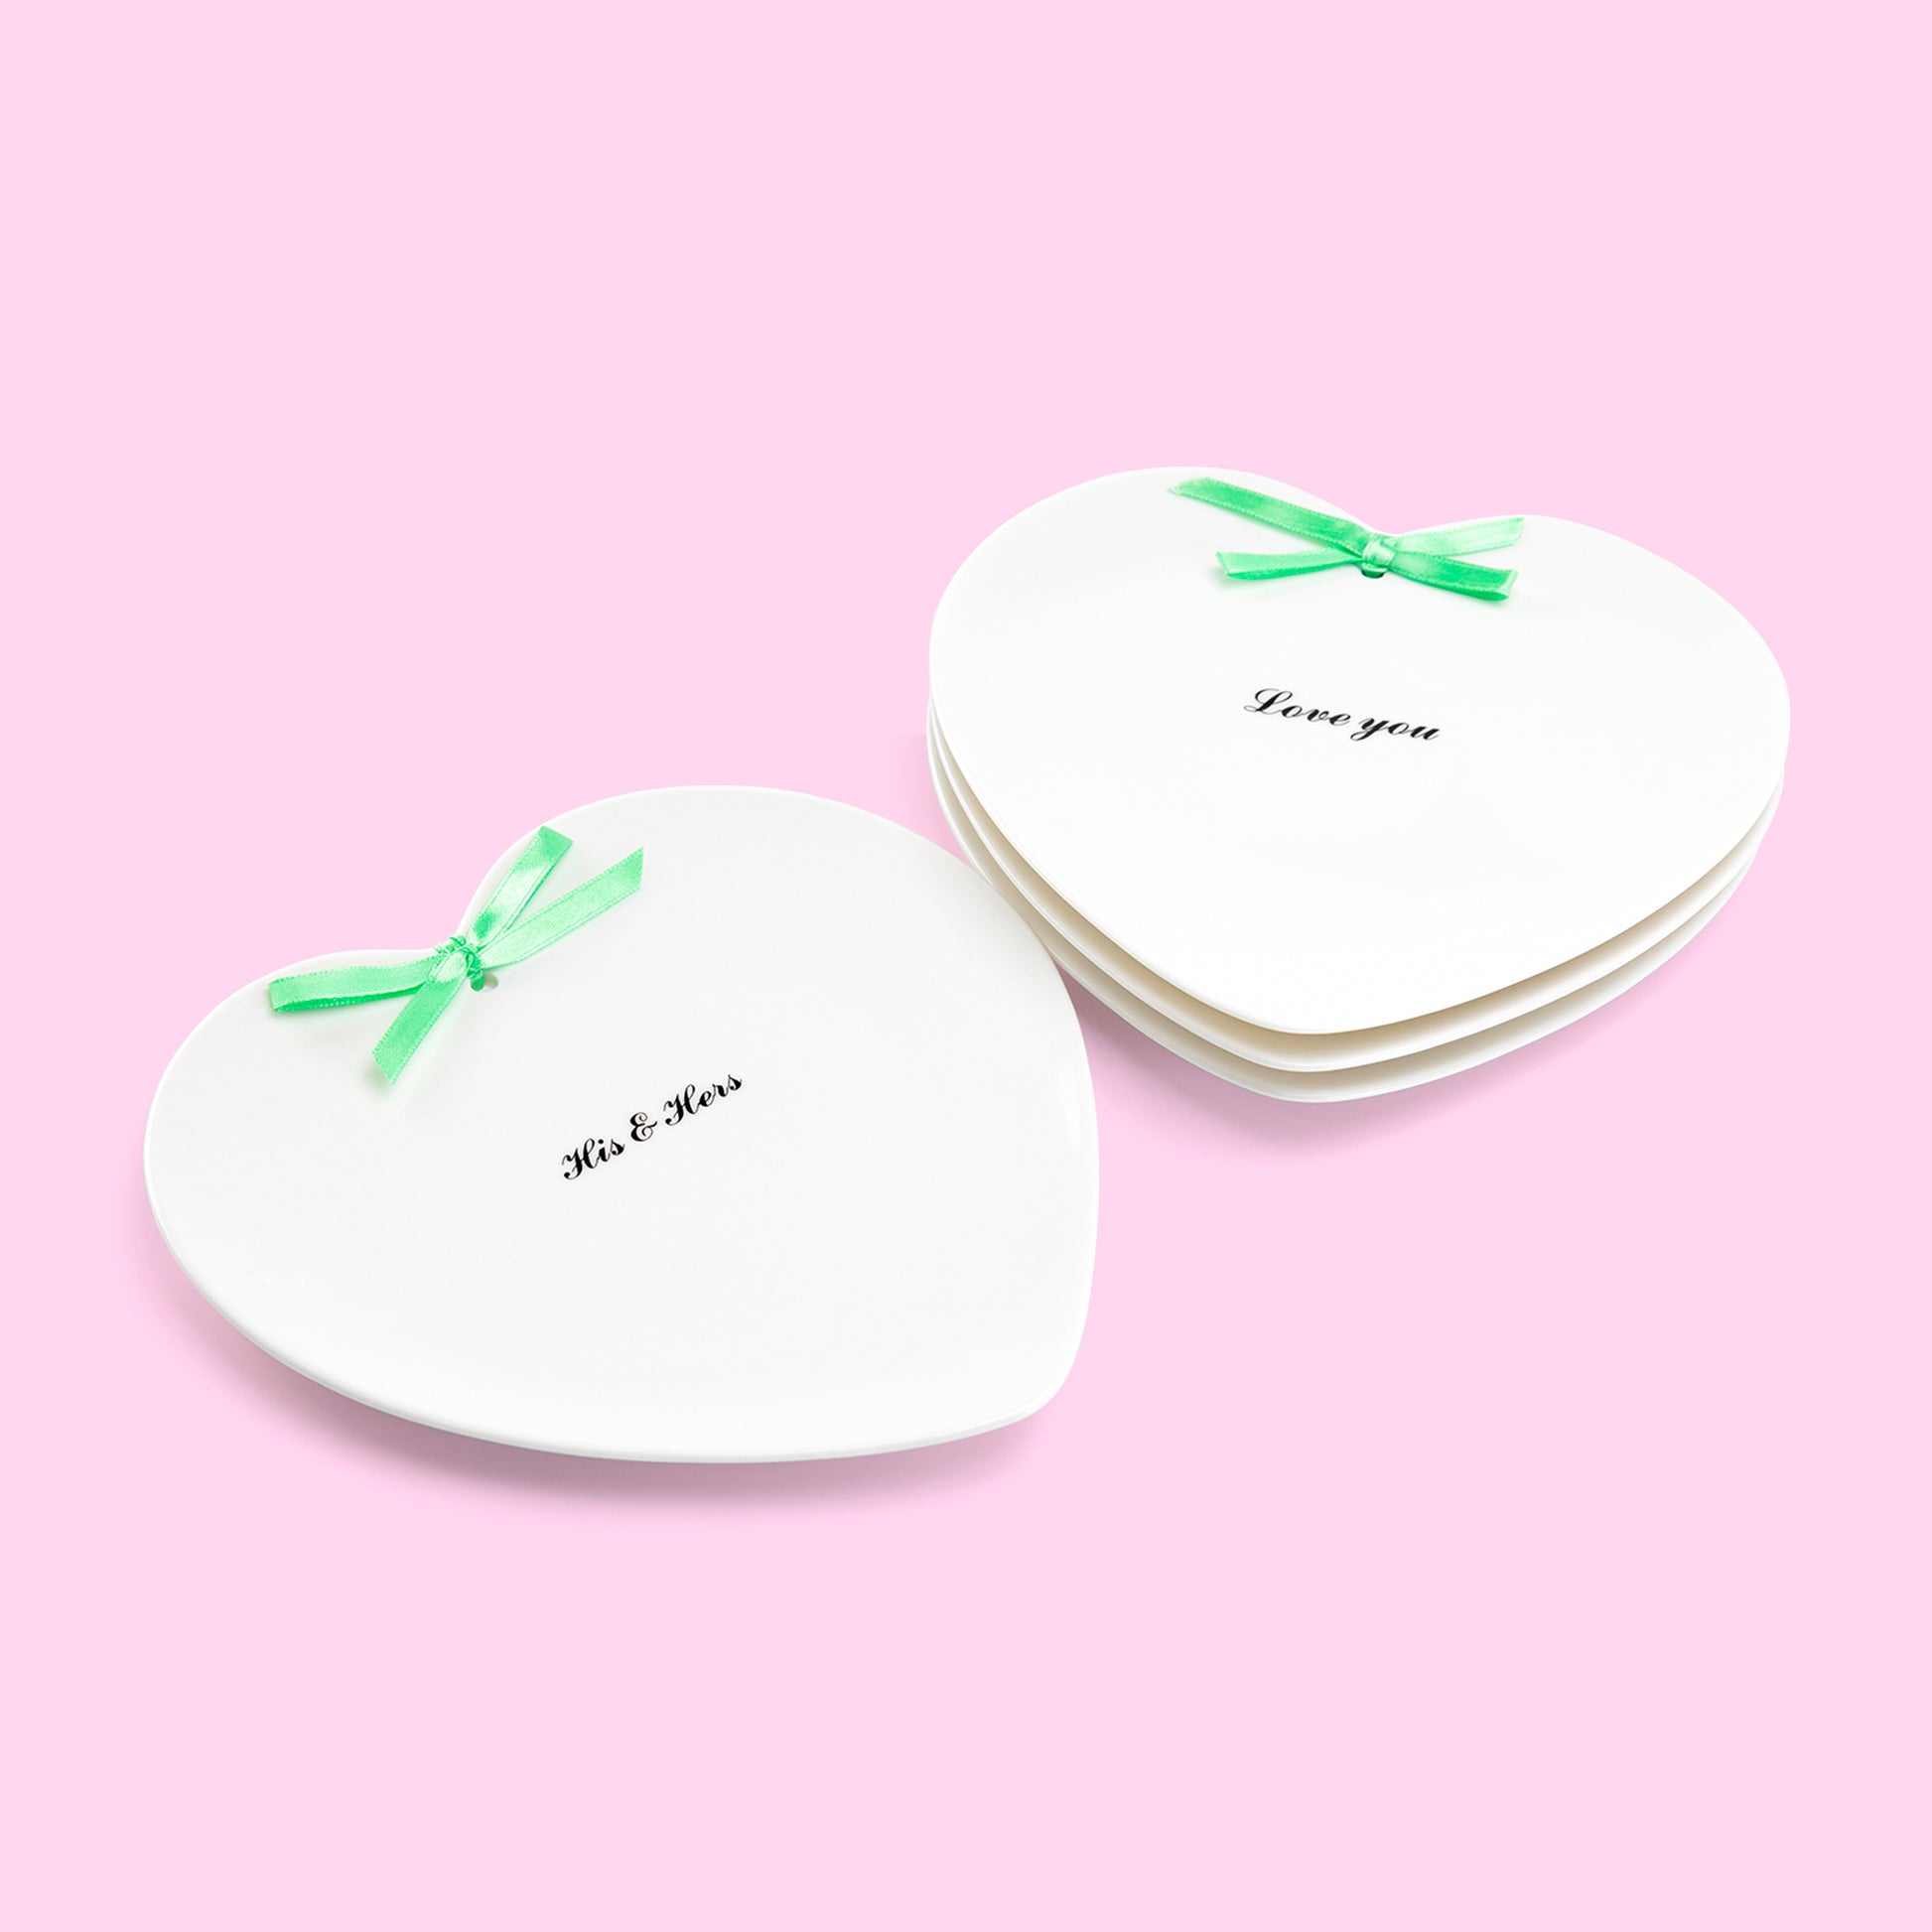 Grace Teaware Love Quotes Heart Shape Plates with Ribbon Tied wedding serve ware bridal shower